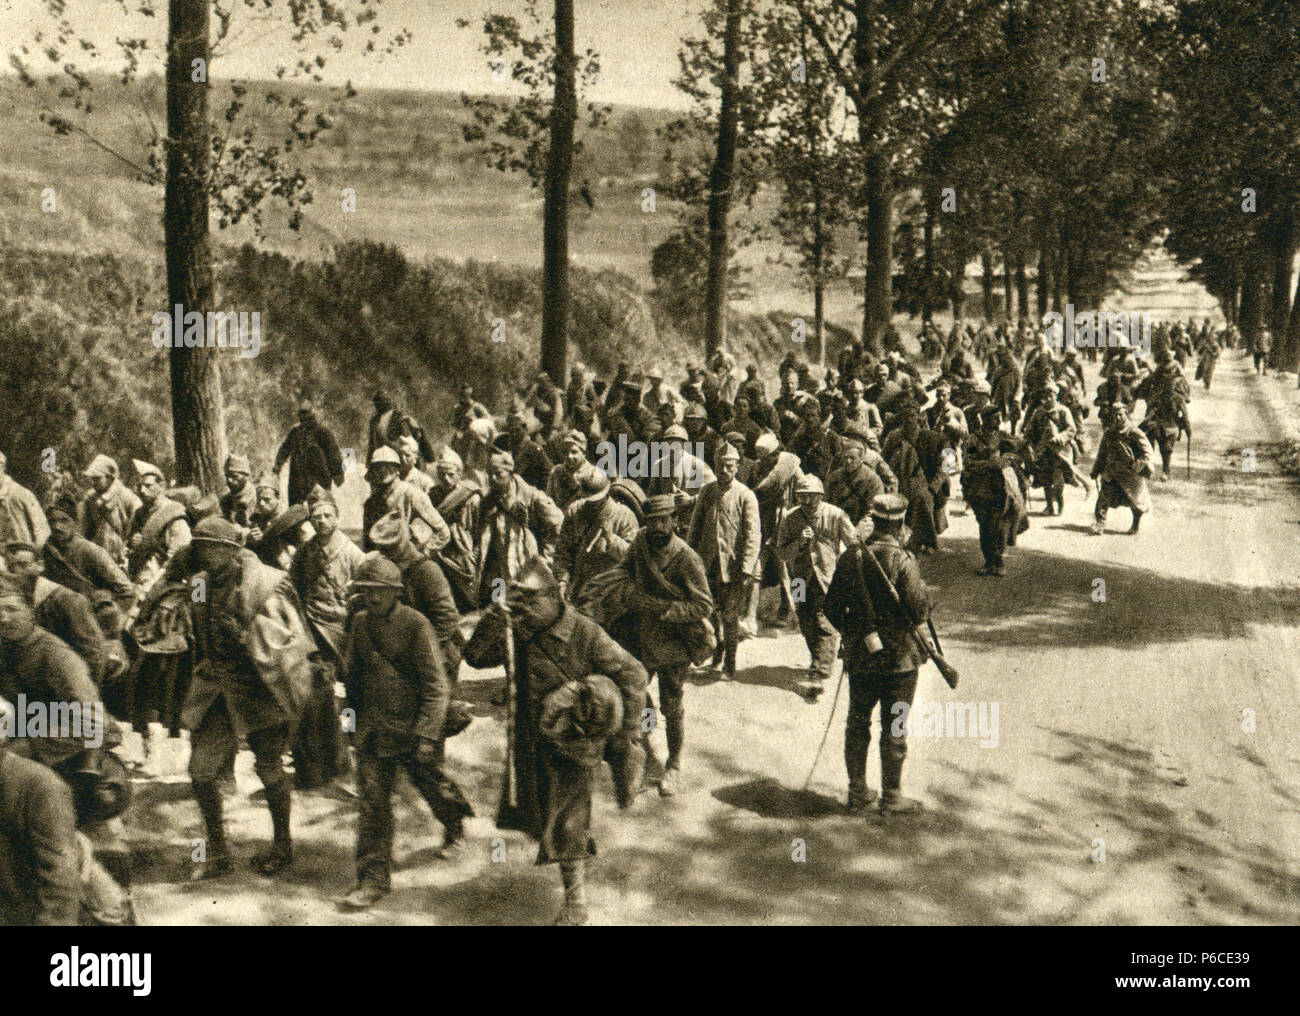 prisoners of war, French soldiers, 1918, Battle of the Aisne, ww1, wwi, world war one Stock Photo